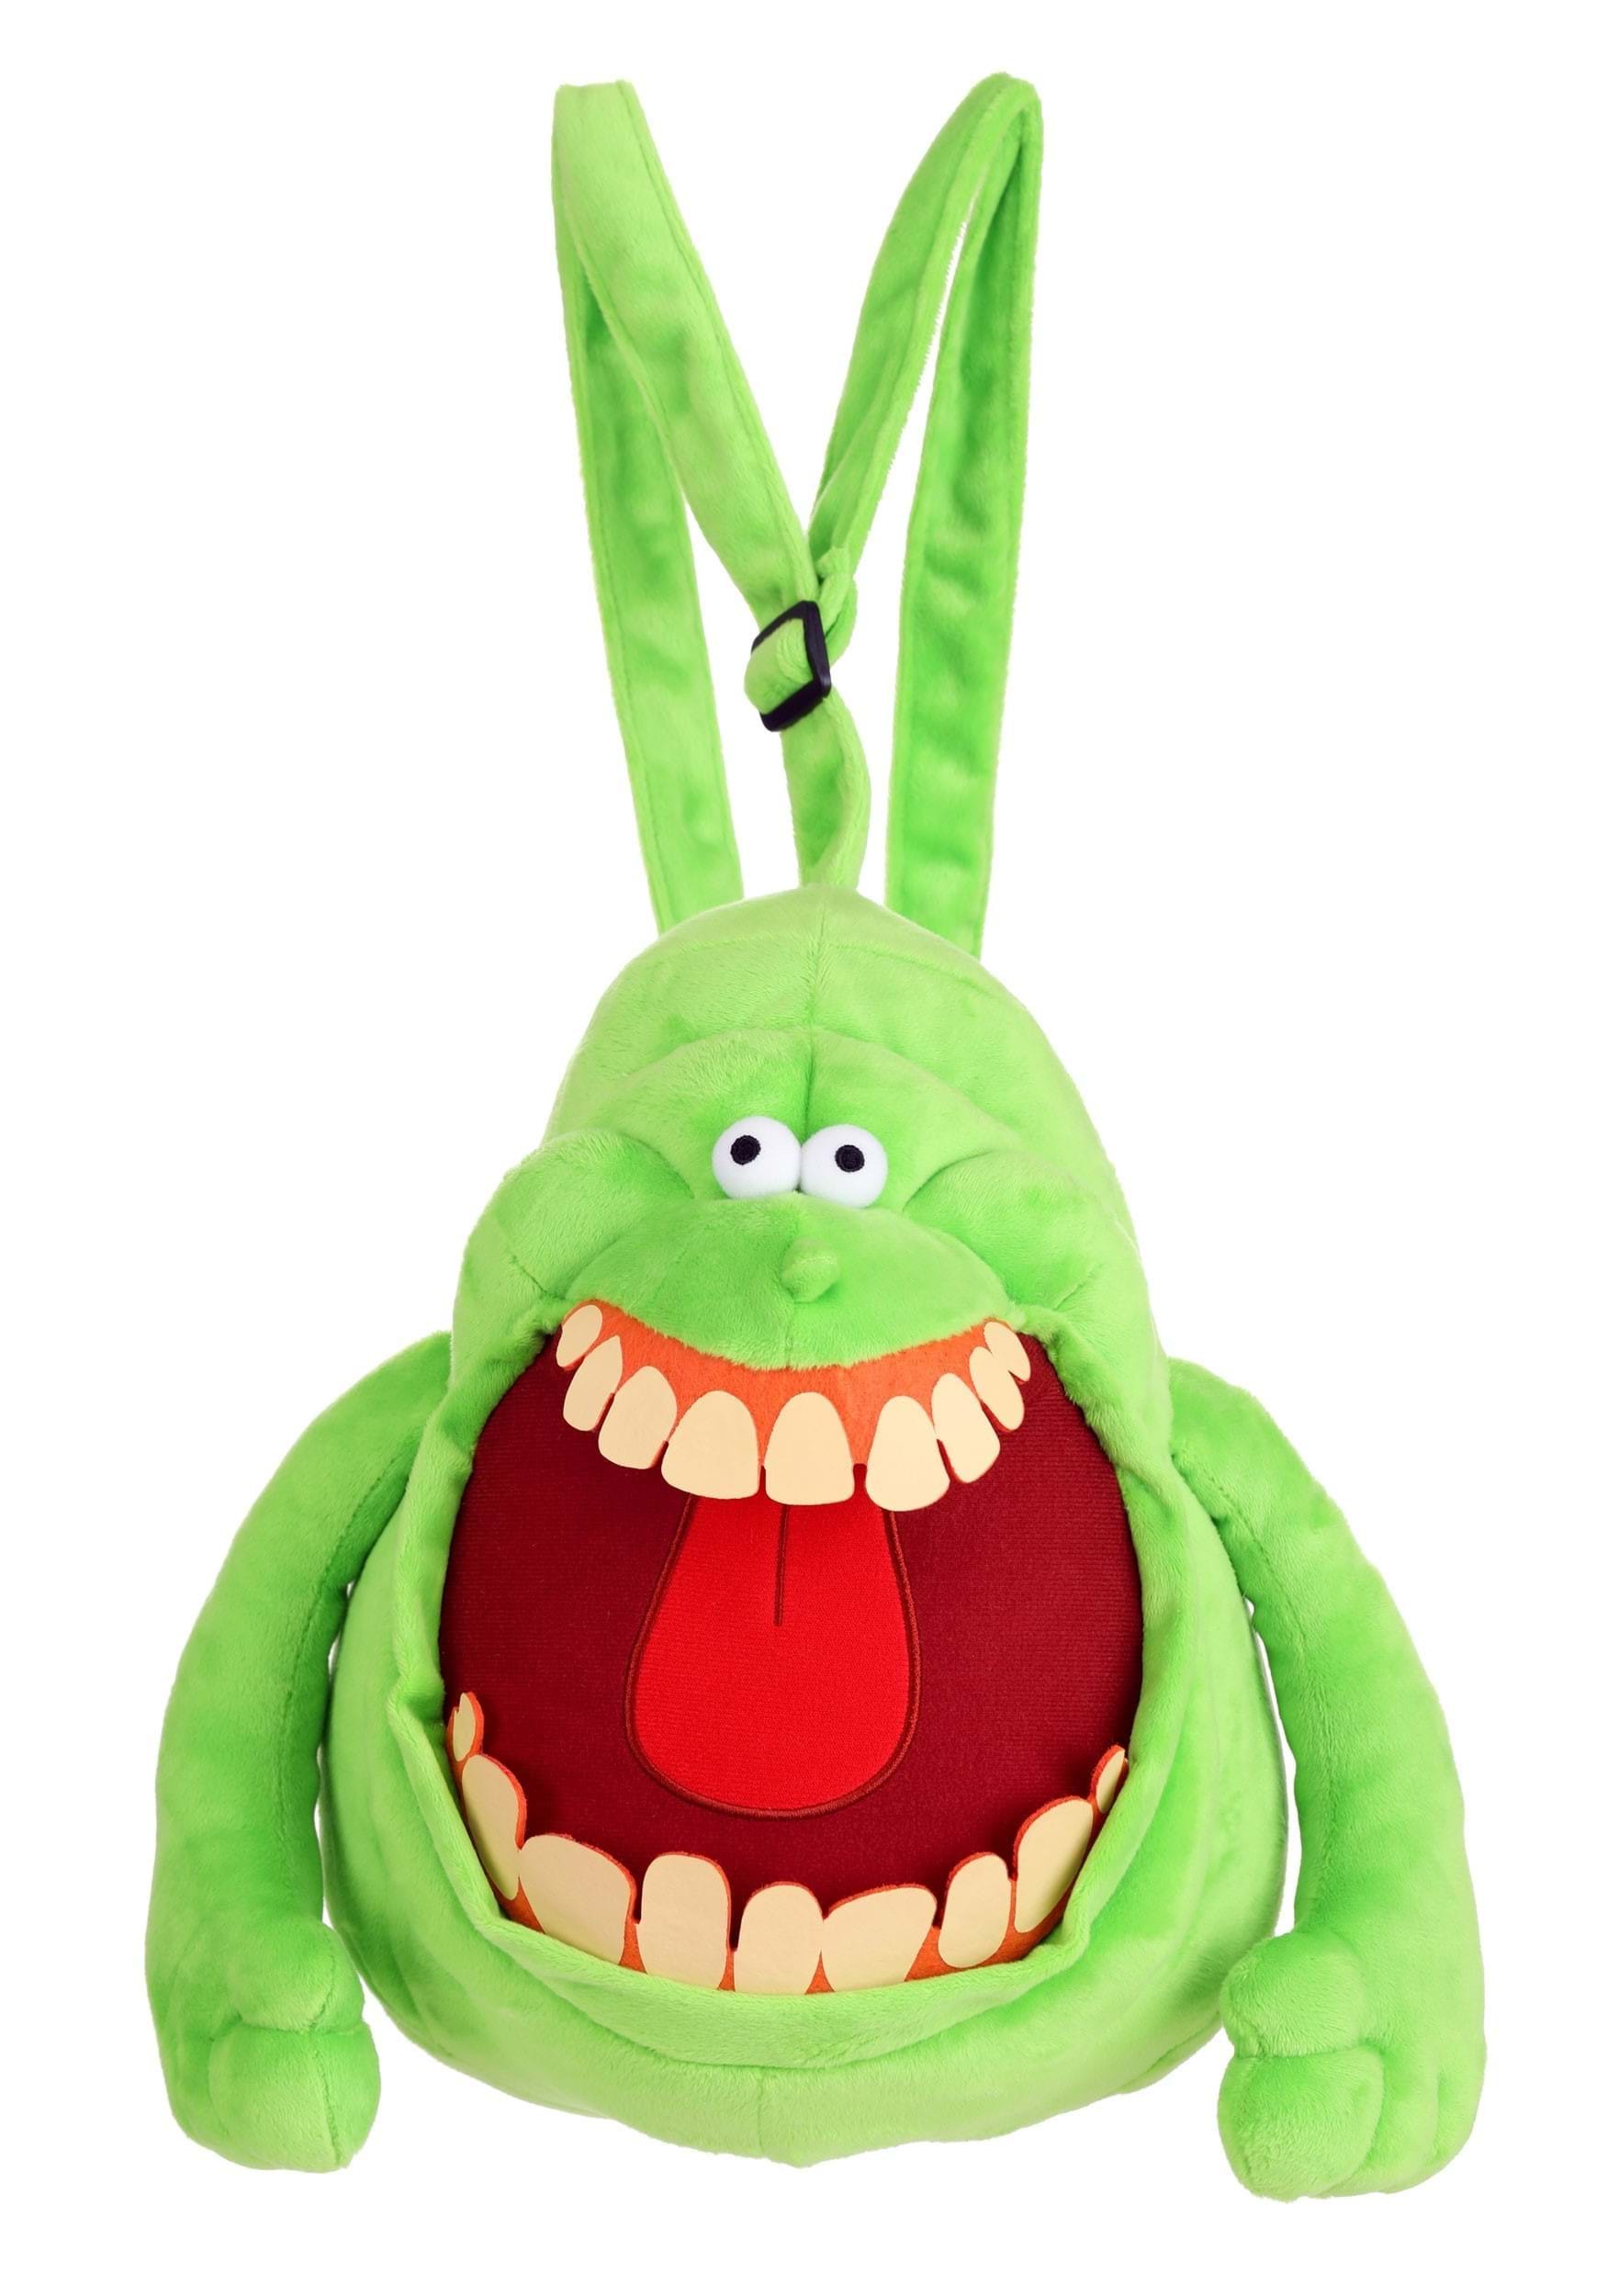 BRAND NEW 5" GHOSTBUSTERS HUNGRY SLIMER SOFT PLUSH BAGCLIP 